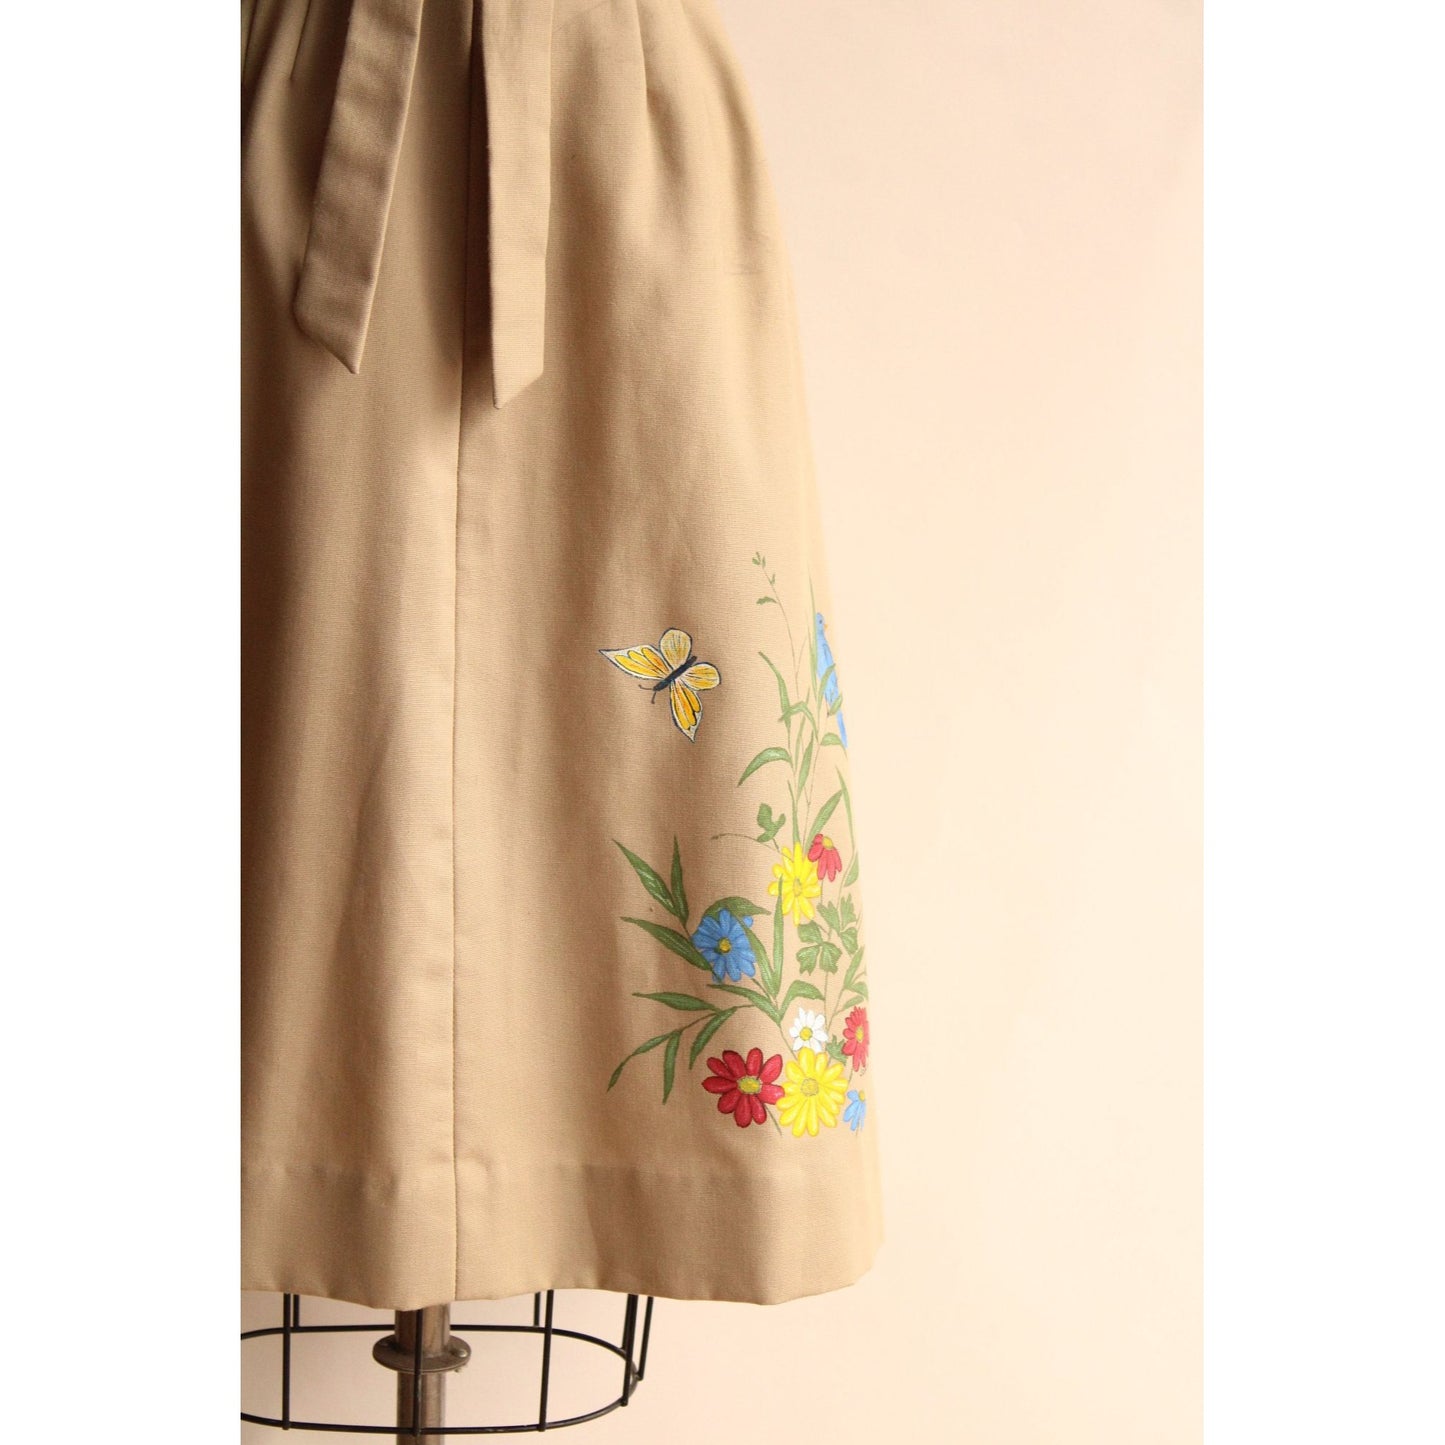 Vintage 1970s Khaki Wrap Skirt with Handpainted Flowers and Butterfly